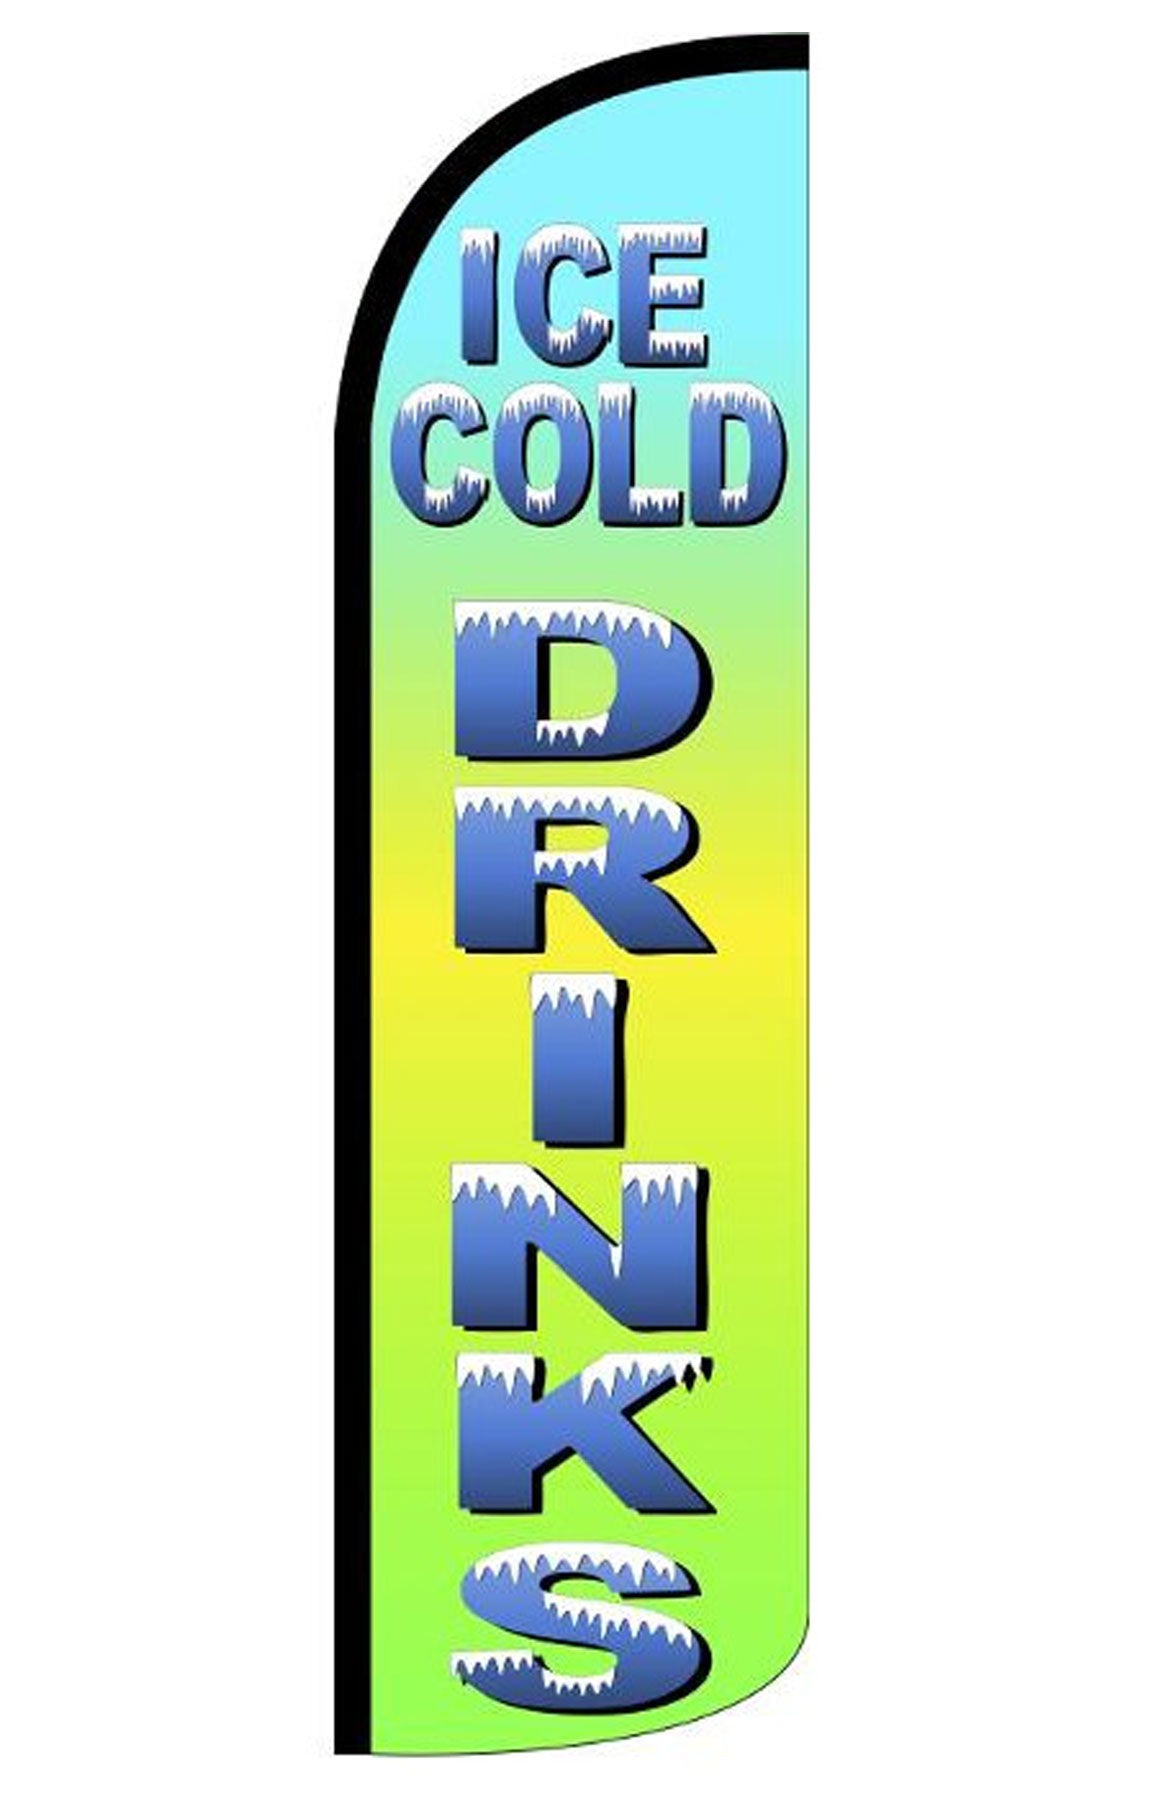 Ice Cold Drinks